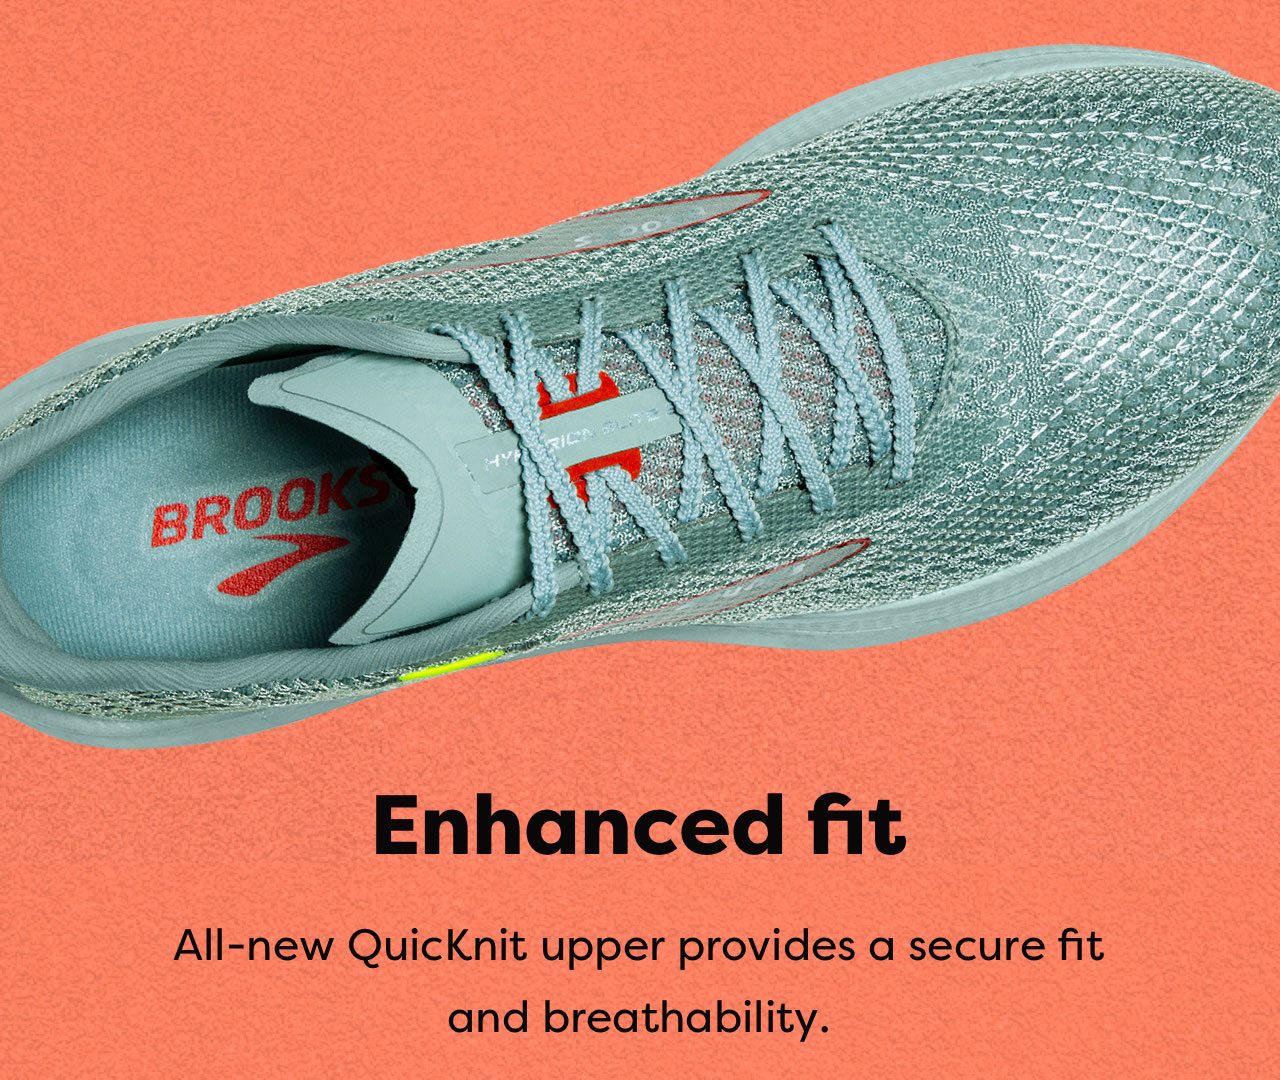 Enhanced fit | All-new QuicKnit upper provides a secure fit and breathability.